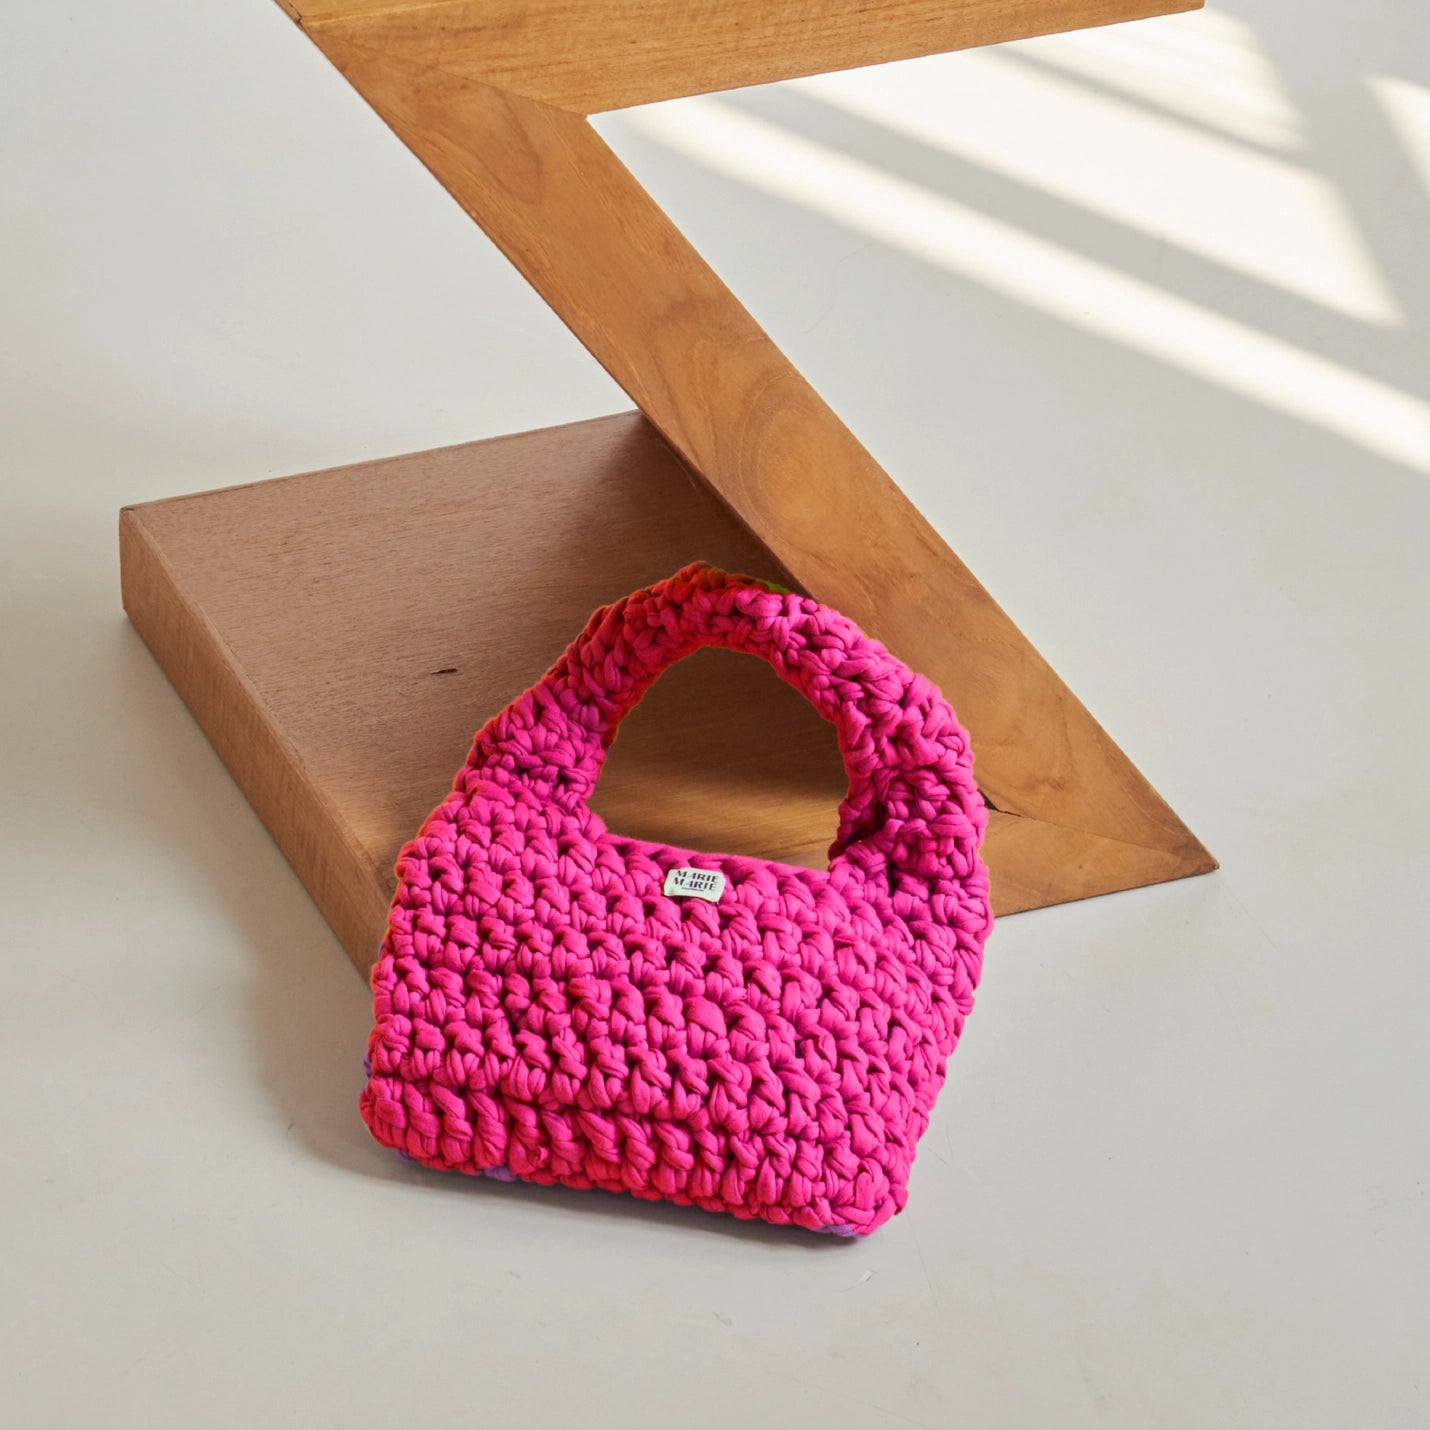 The Chunky Bag by Marie Marie